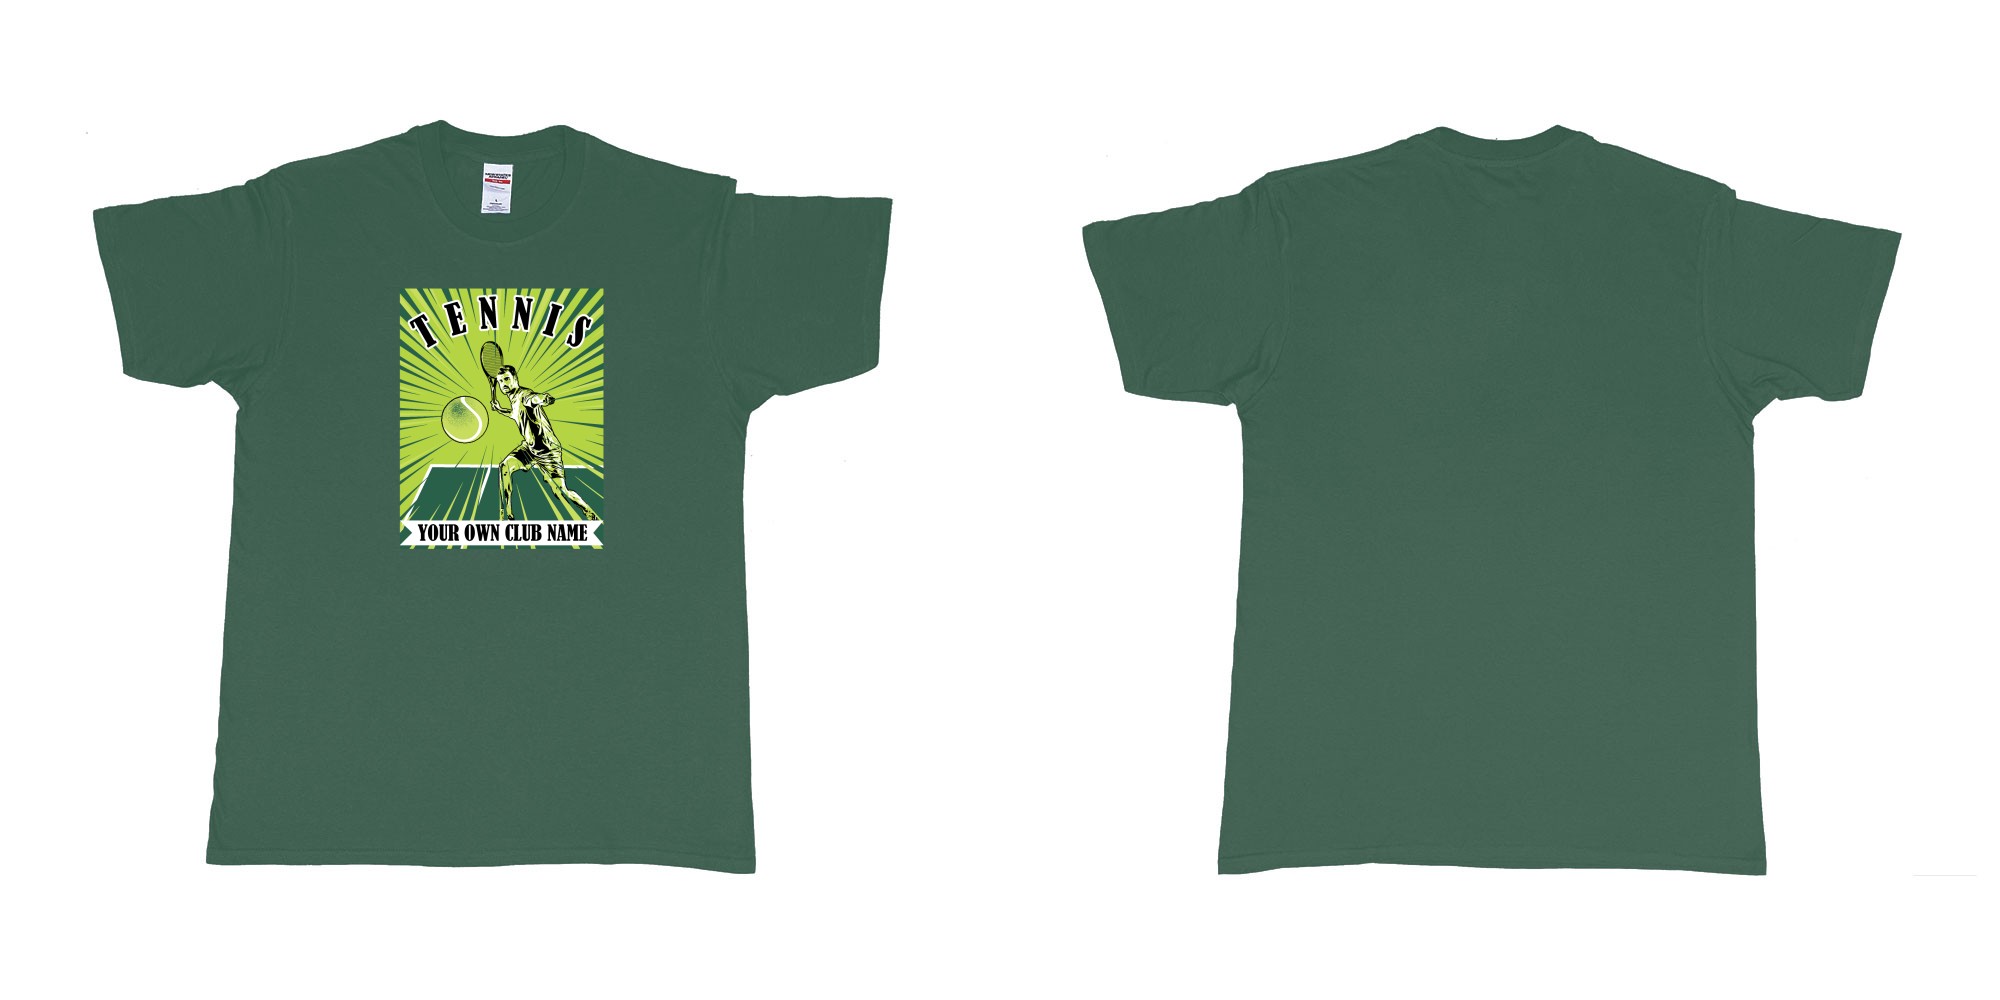 Custom tshirt design  in fabric color forest-green choice your own text made in Bali by The Pirate Way